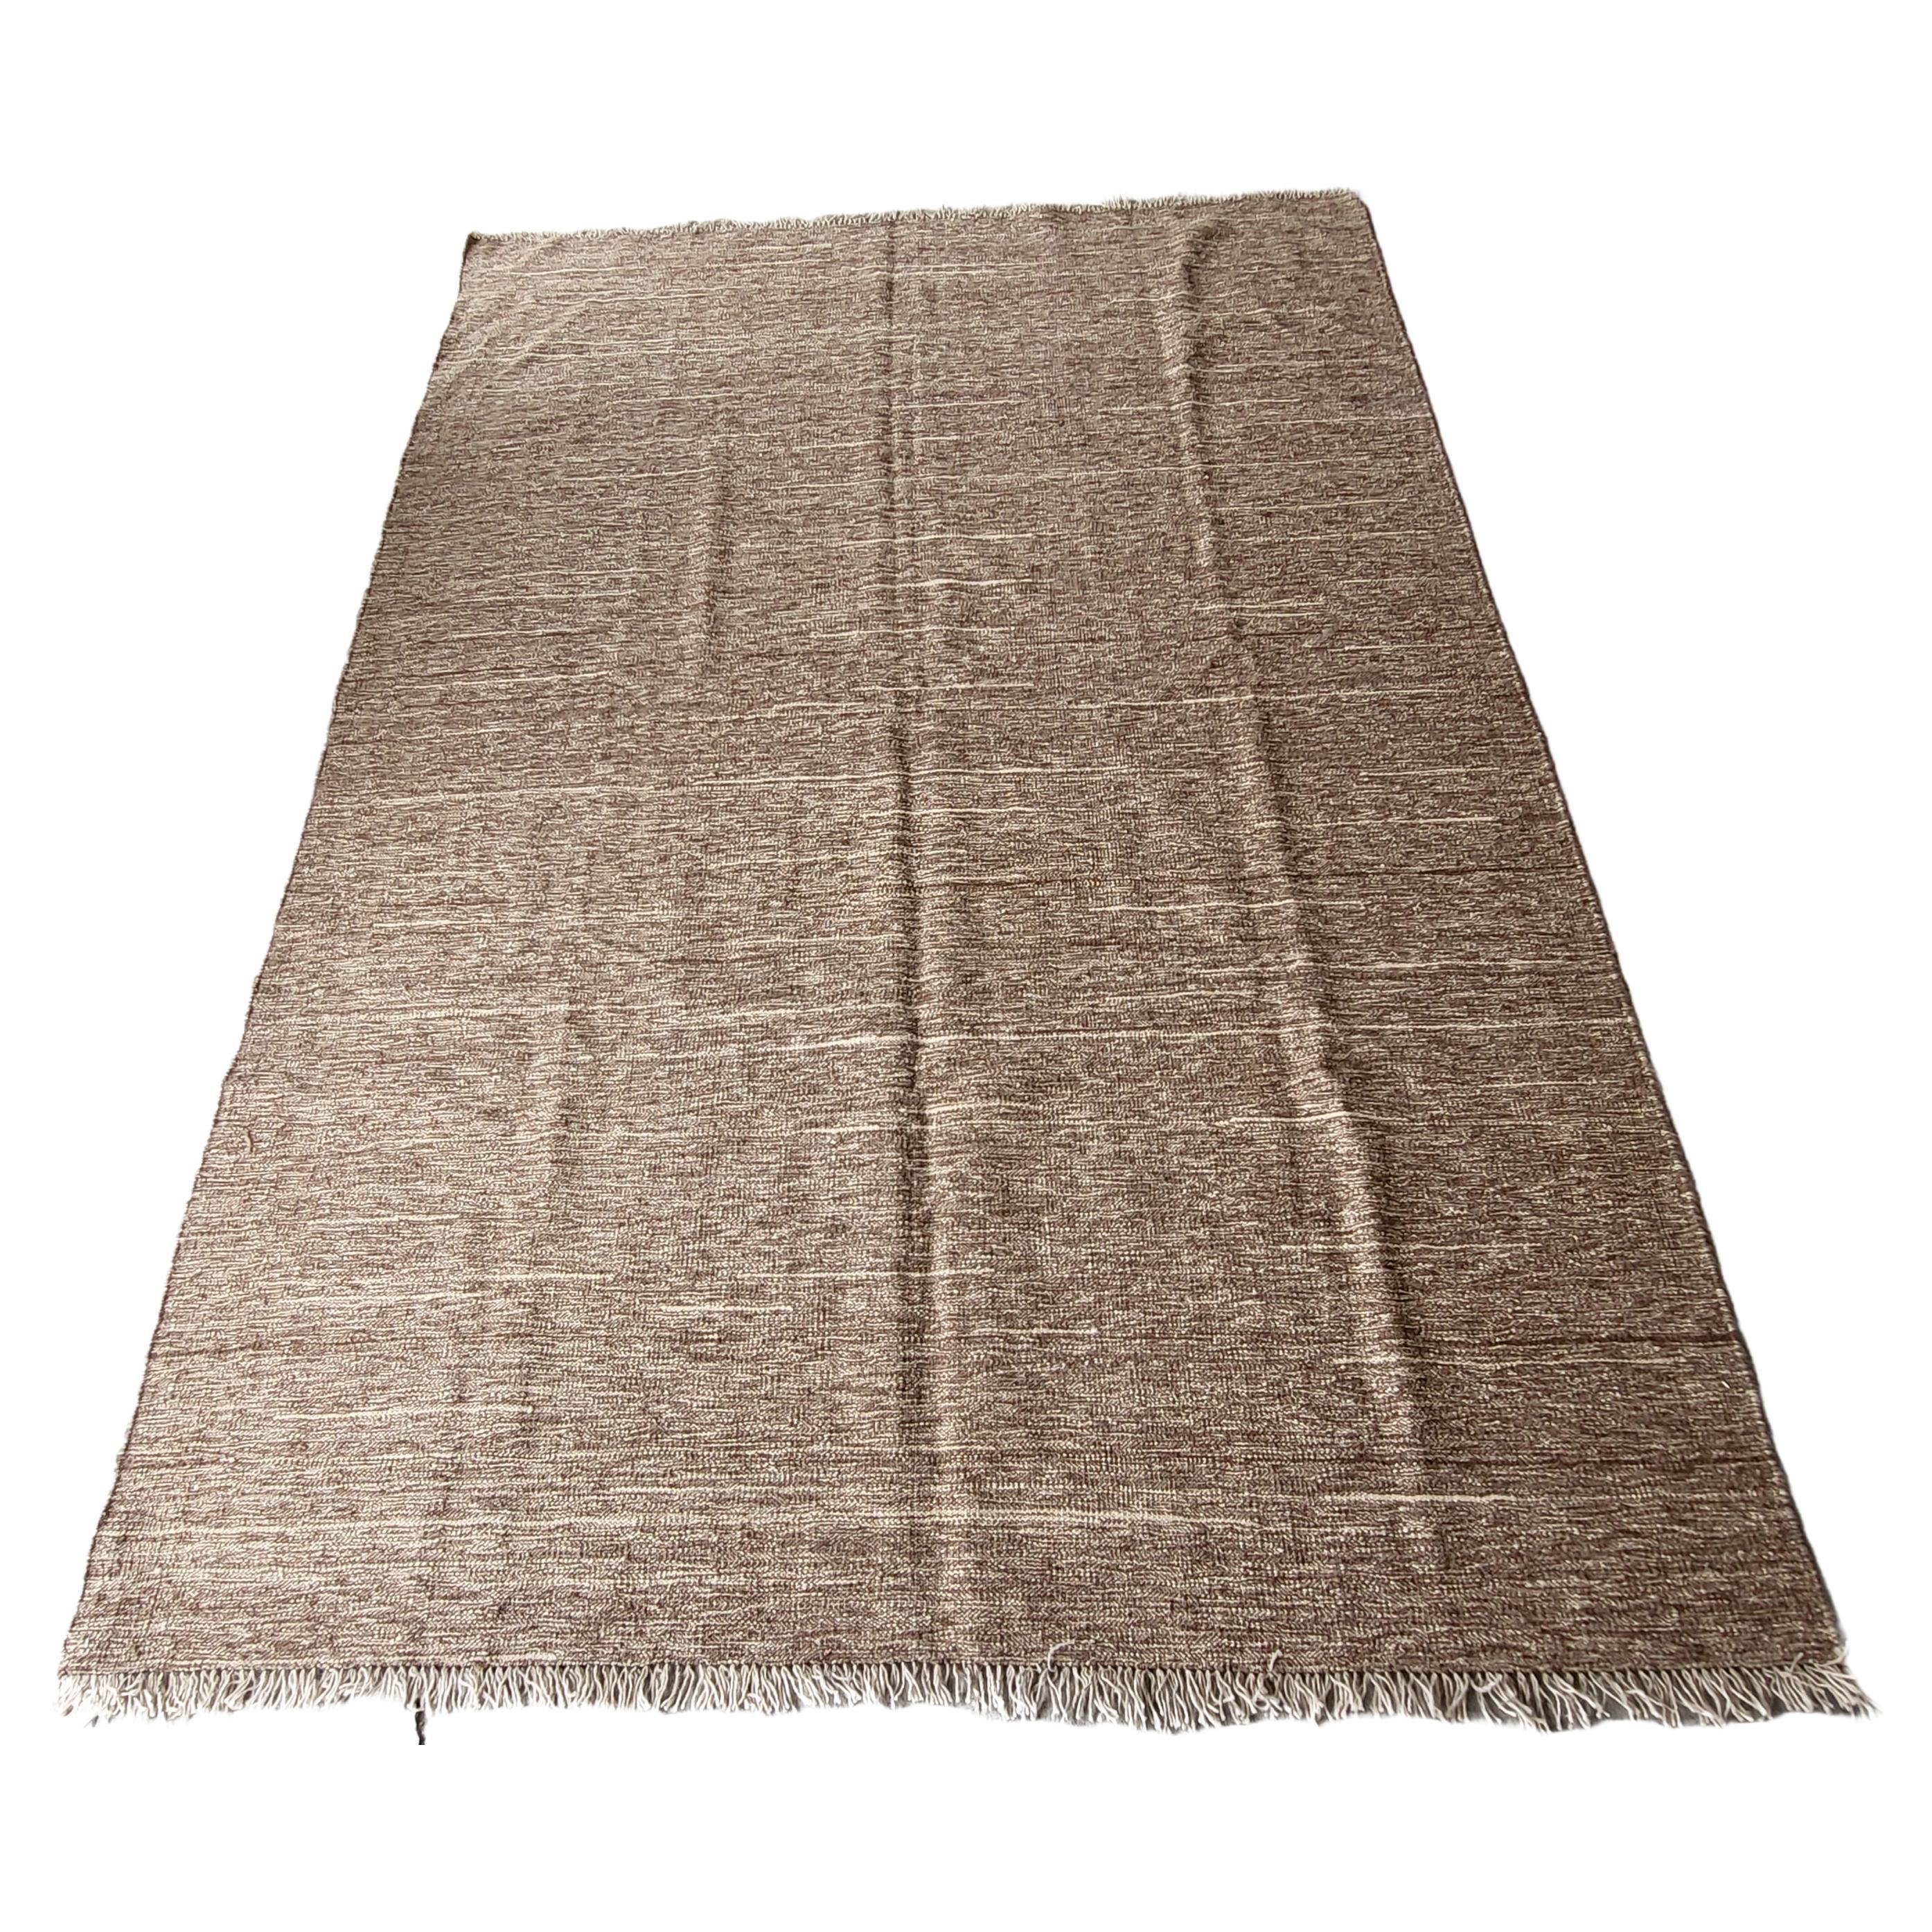 6.5' x 9' Persian Designer Gabbeh Kilim- Contemporary and 100% Natural Wool For Sale